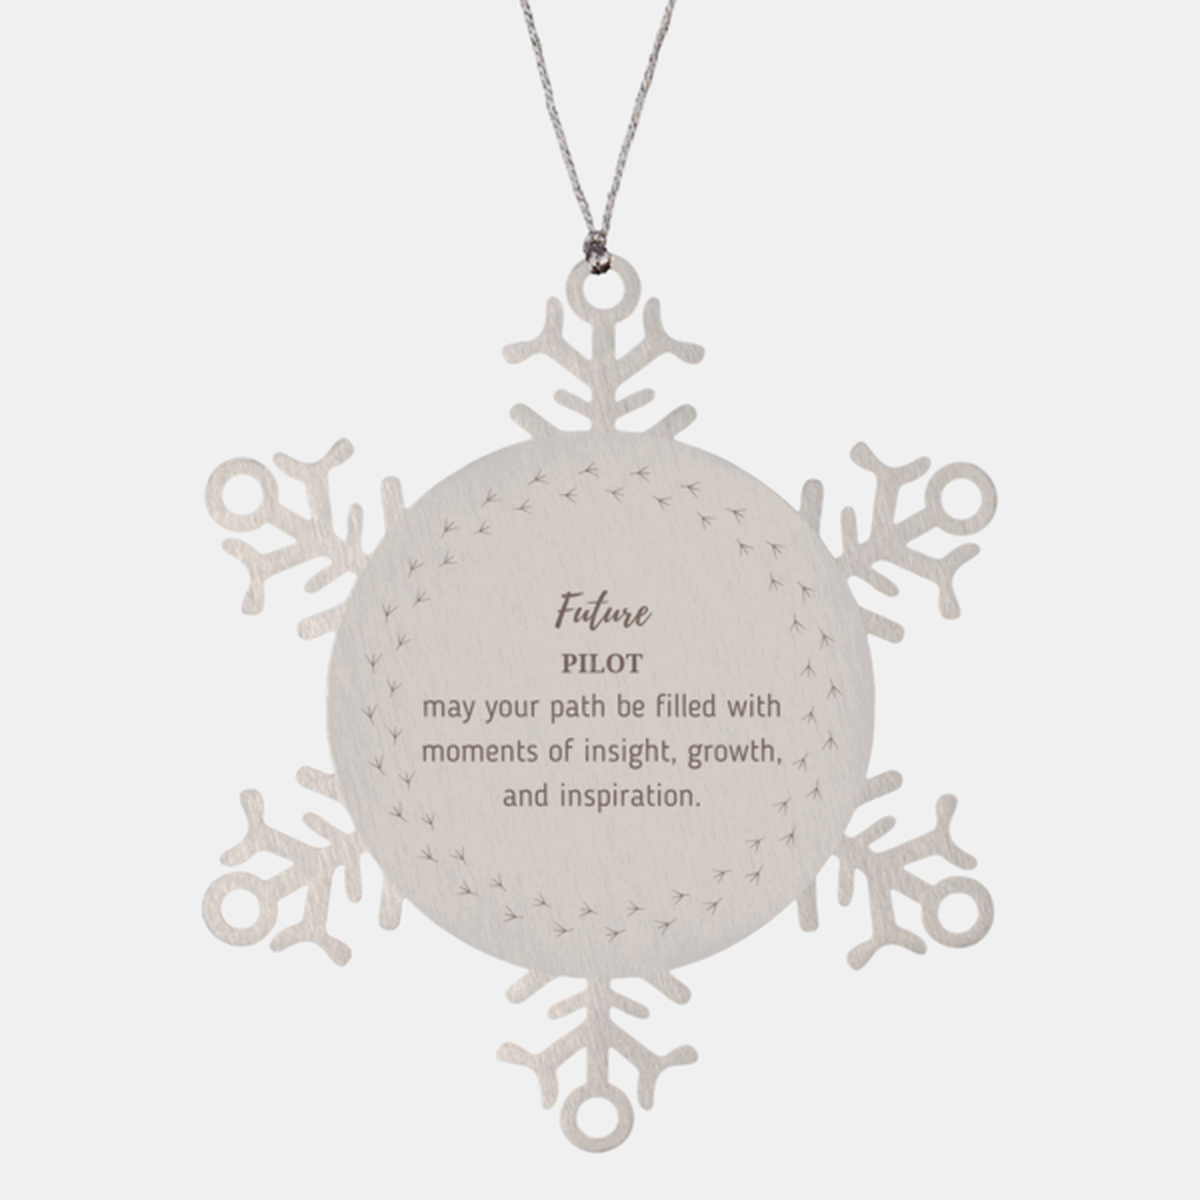 Future Pilot Gifts, May your path be filled with moments of insight, Graduation Gifts for New Pilot, Christmas Unique Snowflake Ornament For Men, Women, Friends